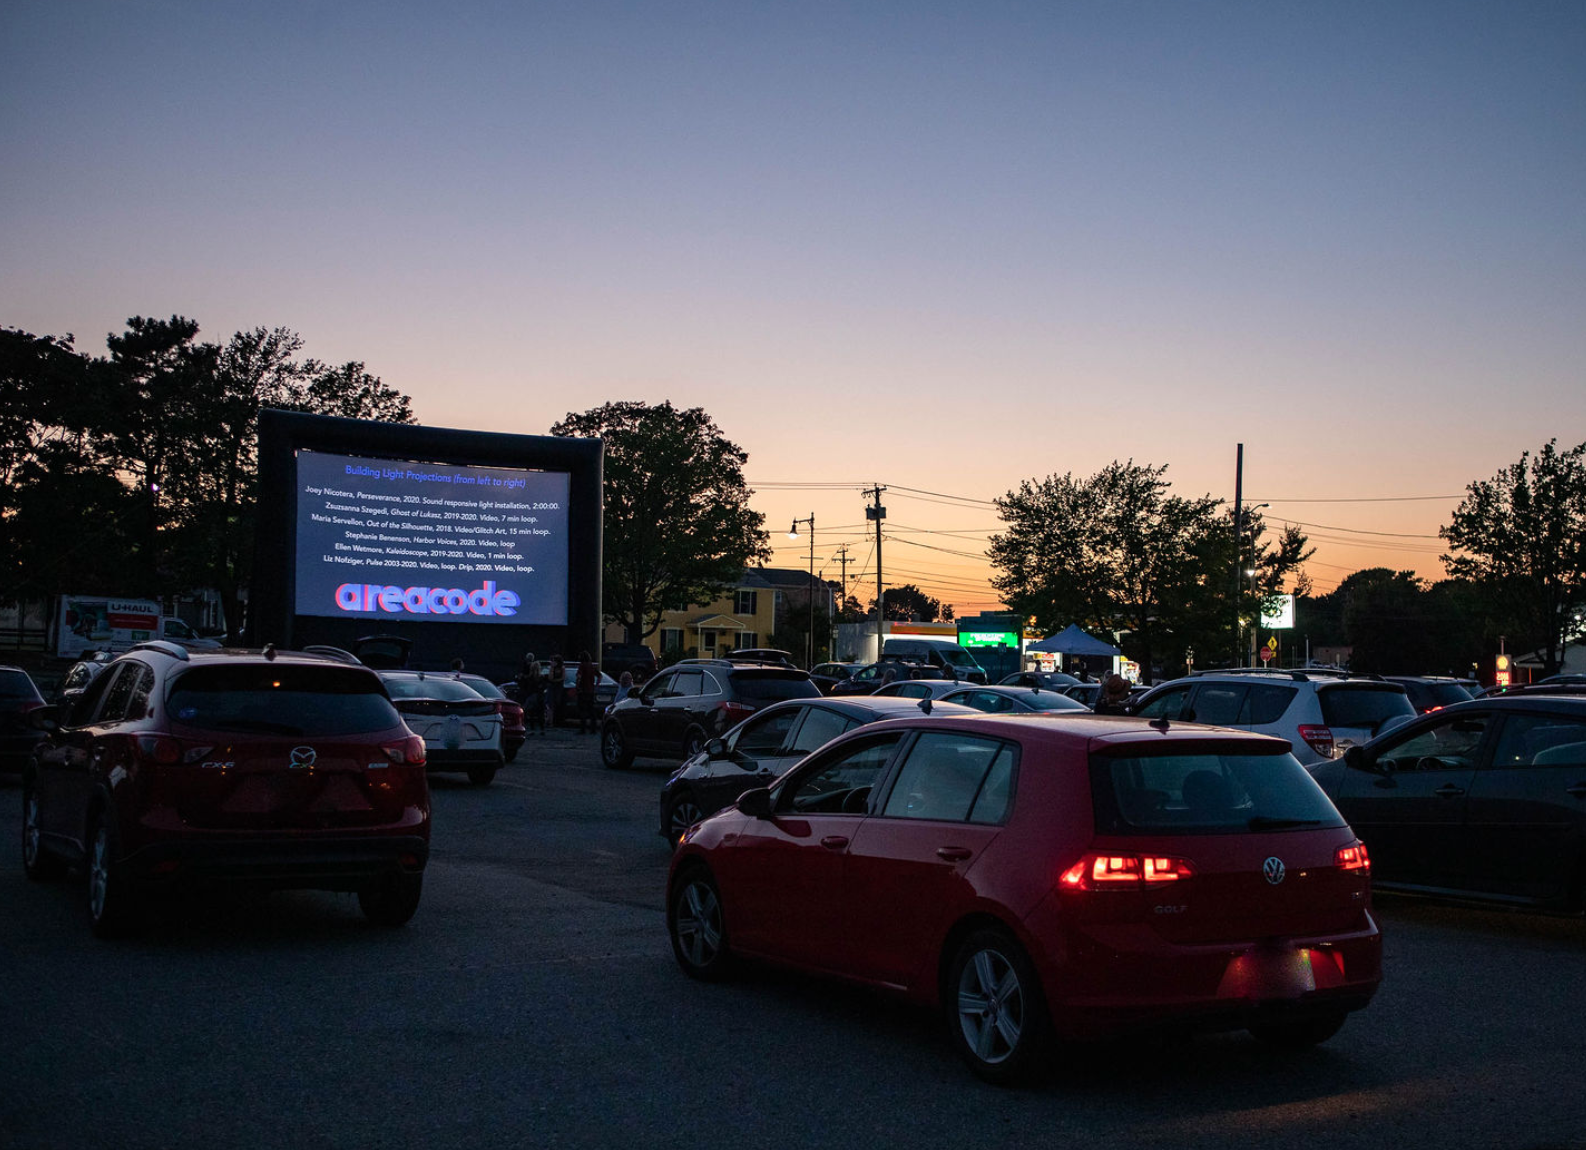 Cars are parked in front of a pop-up screen displaying a message at Salem State University.